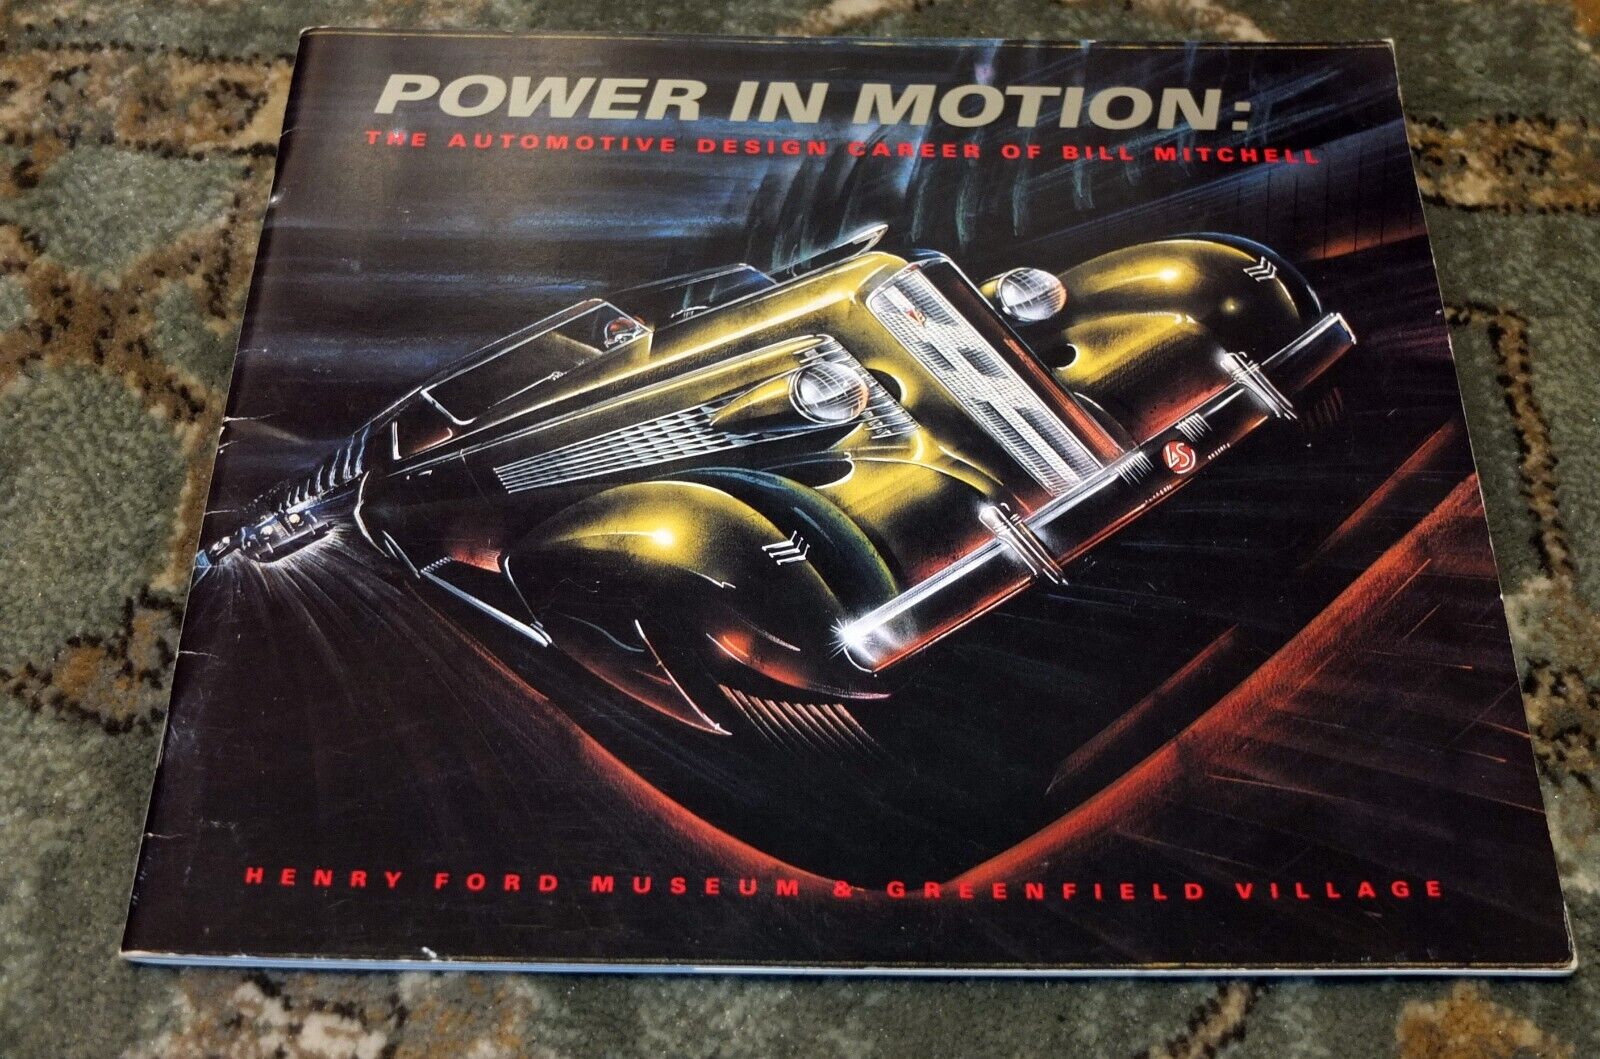 POWER IN MOTION THE AUTOMOTIVE DESIGN CAREER OF BILL MITCHELL